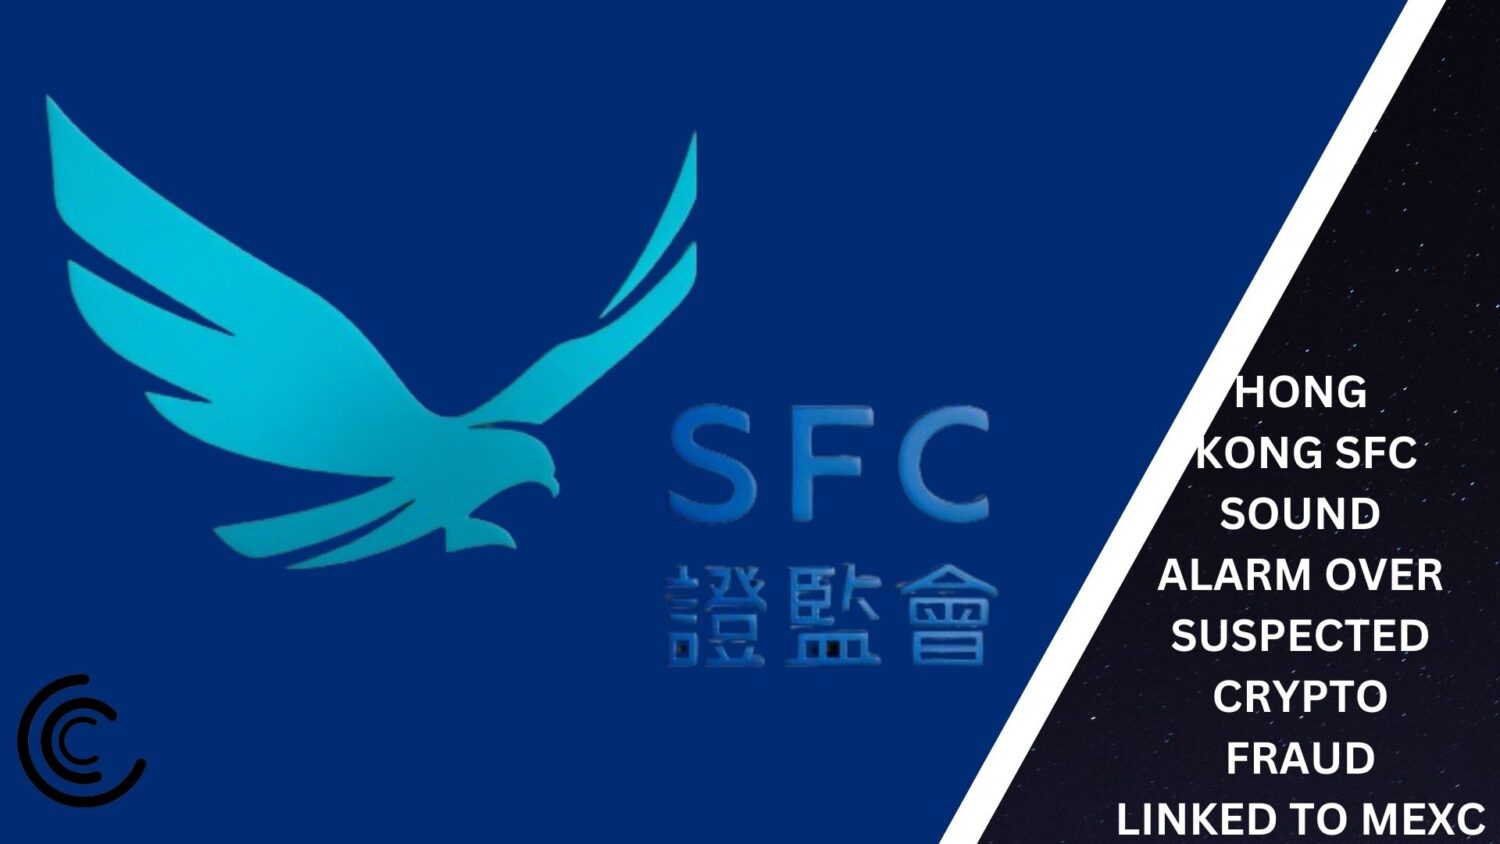 Hong Kong Sfc Sound Alarm Over Suspected Crypto Fraud Linked To Mexc